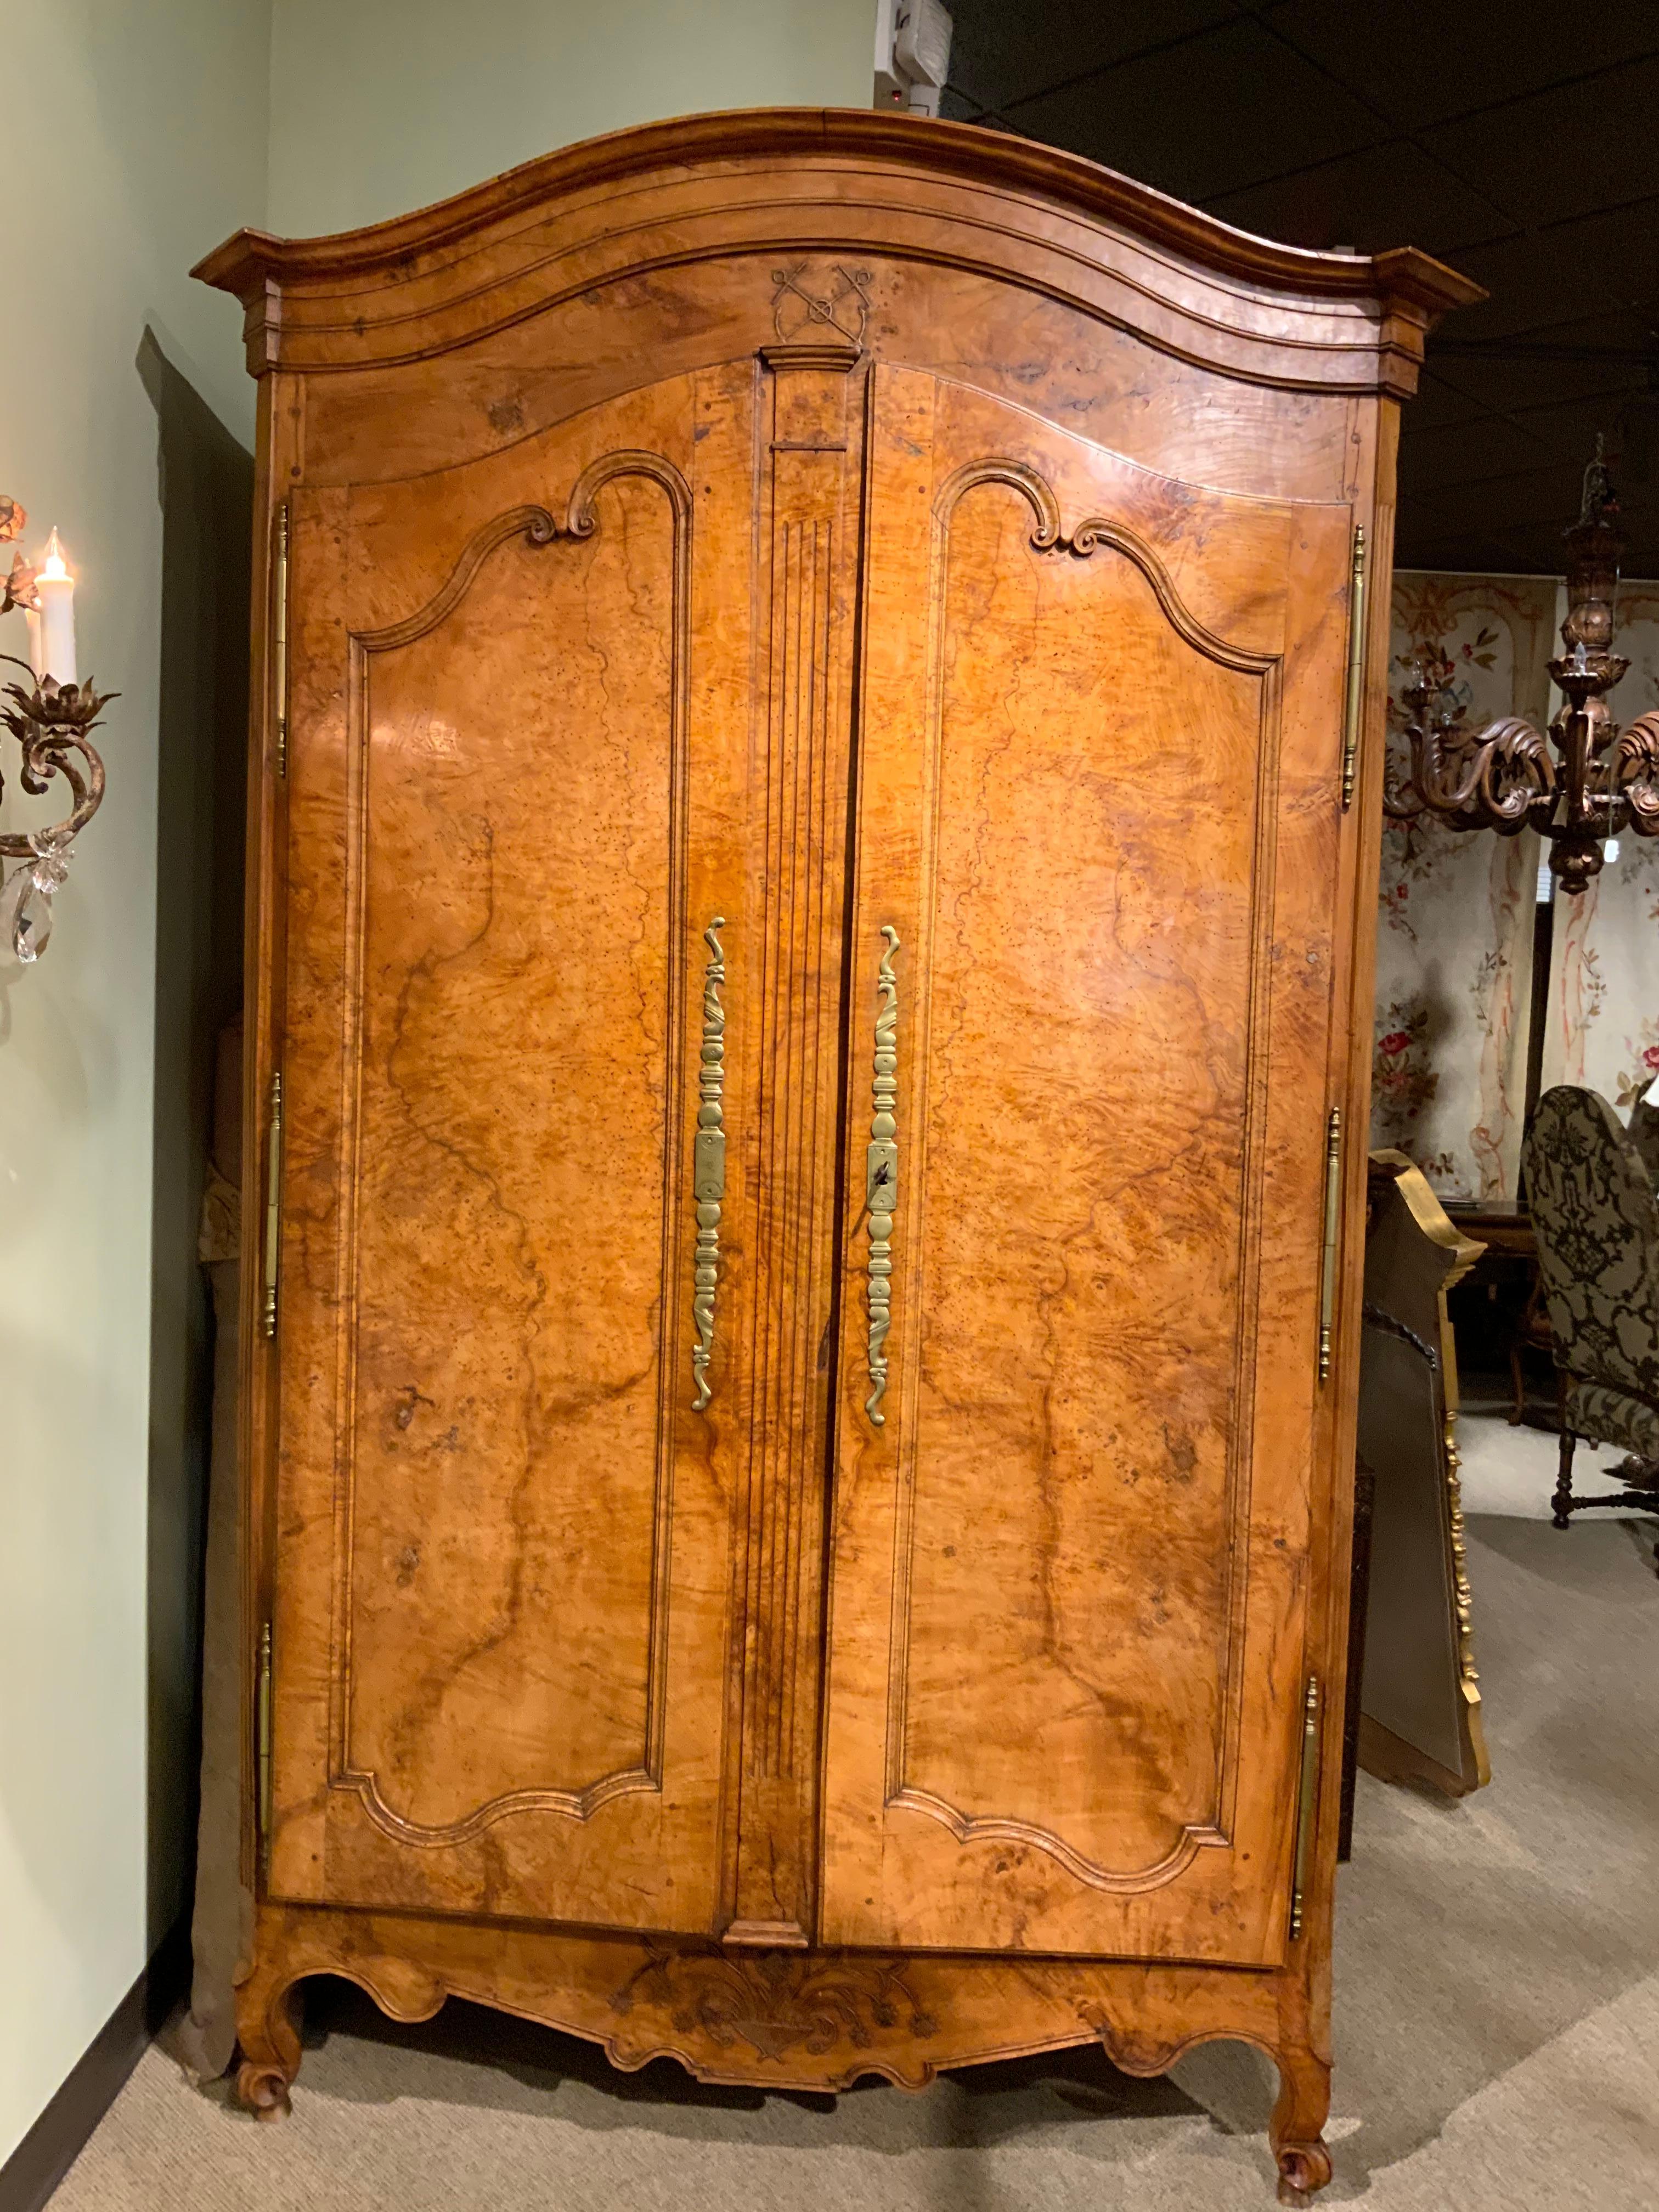 Antique rustic armoire with doors that open wide. Original hardware and locks.
The crest has a domed shape and beneath very good carvings of crossed
Anchors. Three sturdy shelves that will accommodate good storage.
Floral and foliate carvings